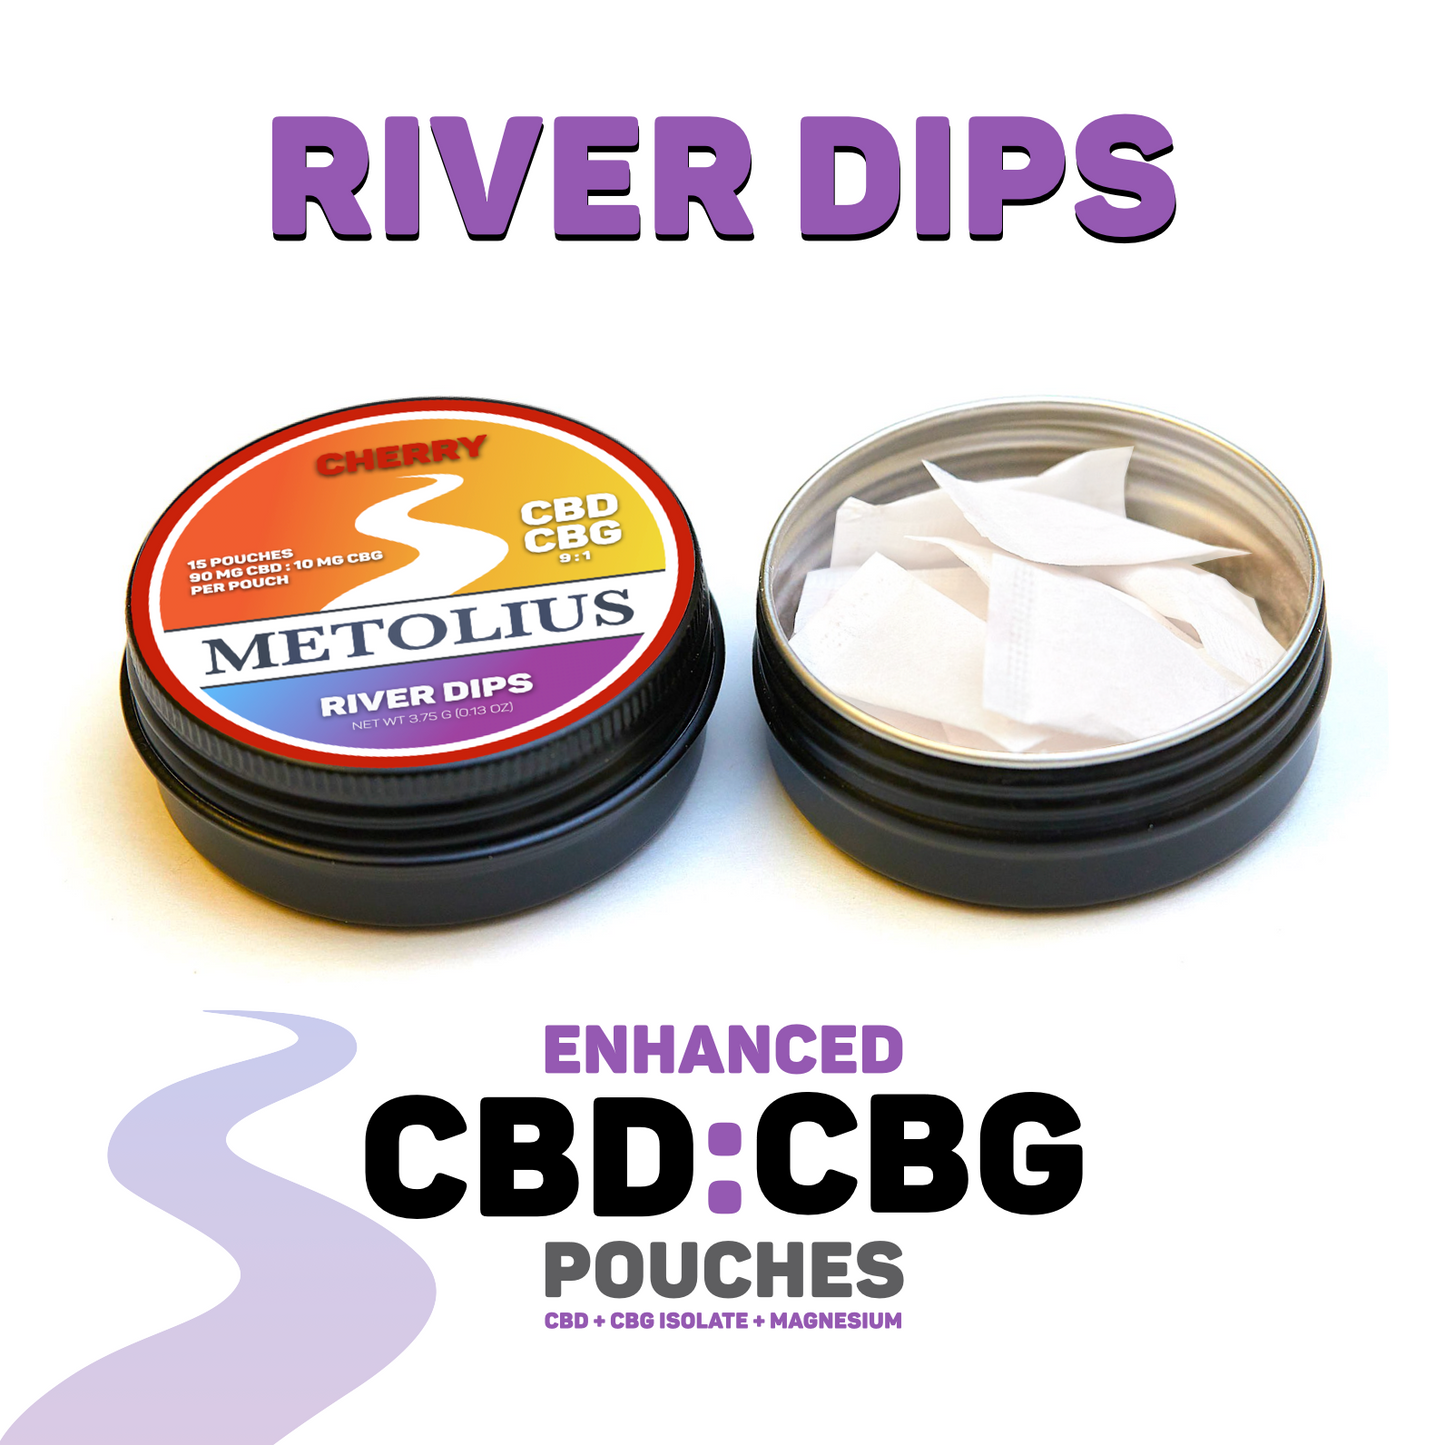 The Efficacy Of CBD + CBG Lip Pouches - A Convenient Way To Improve Absorption And Impact